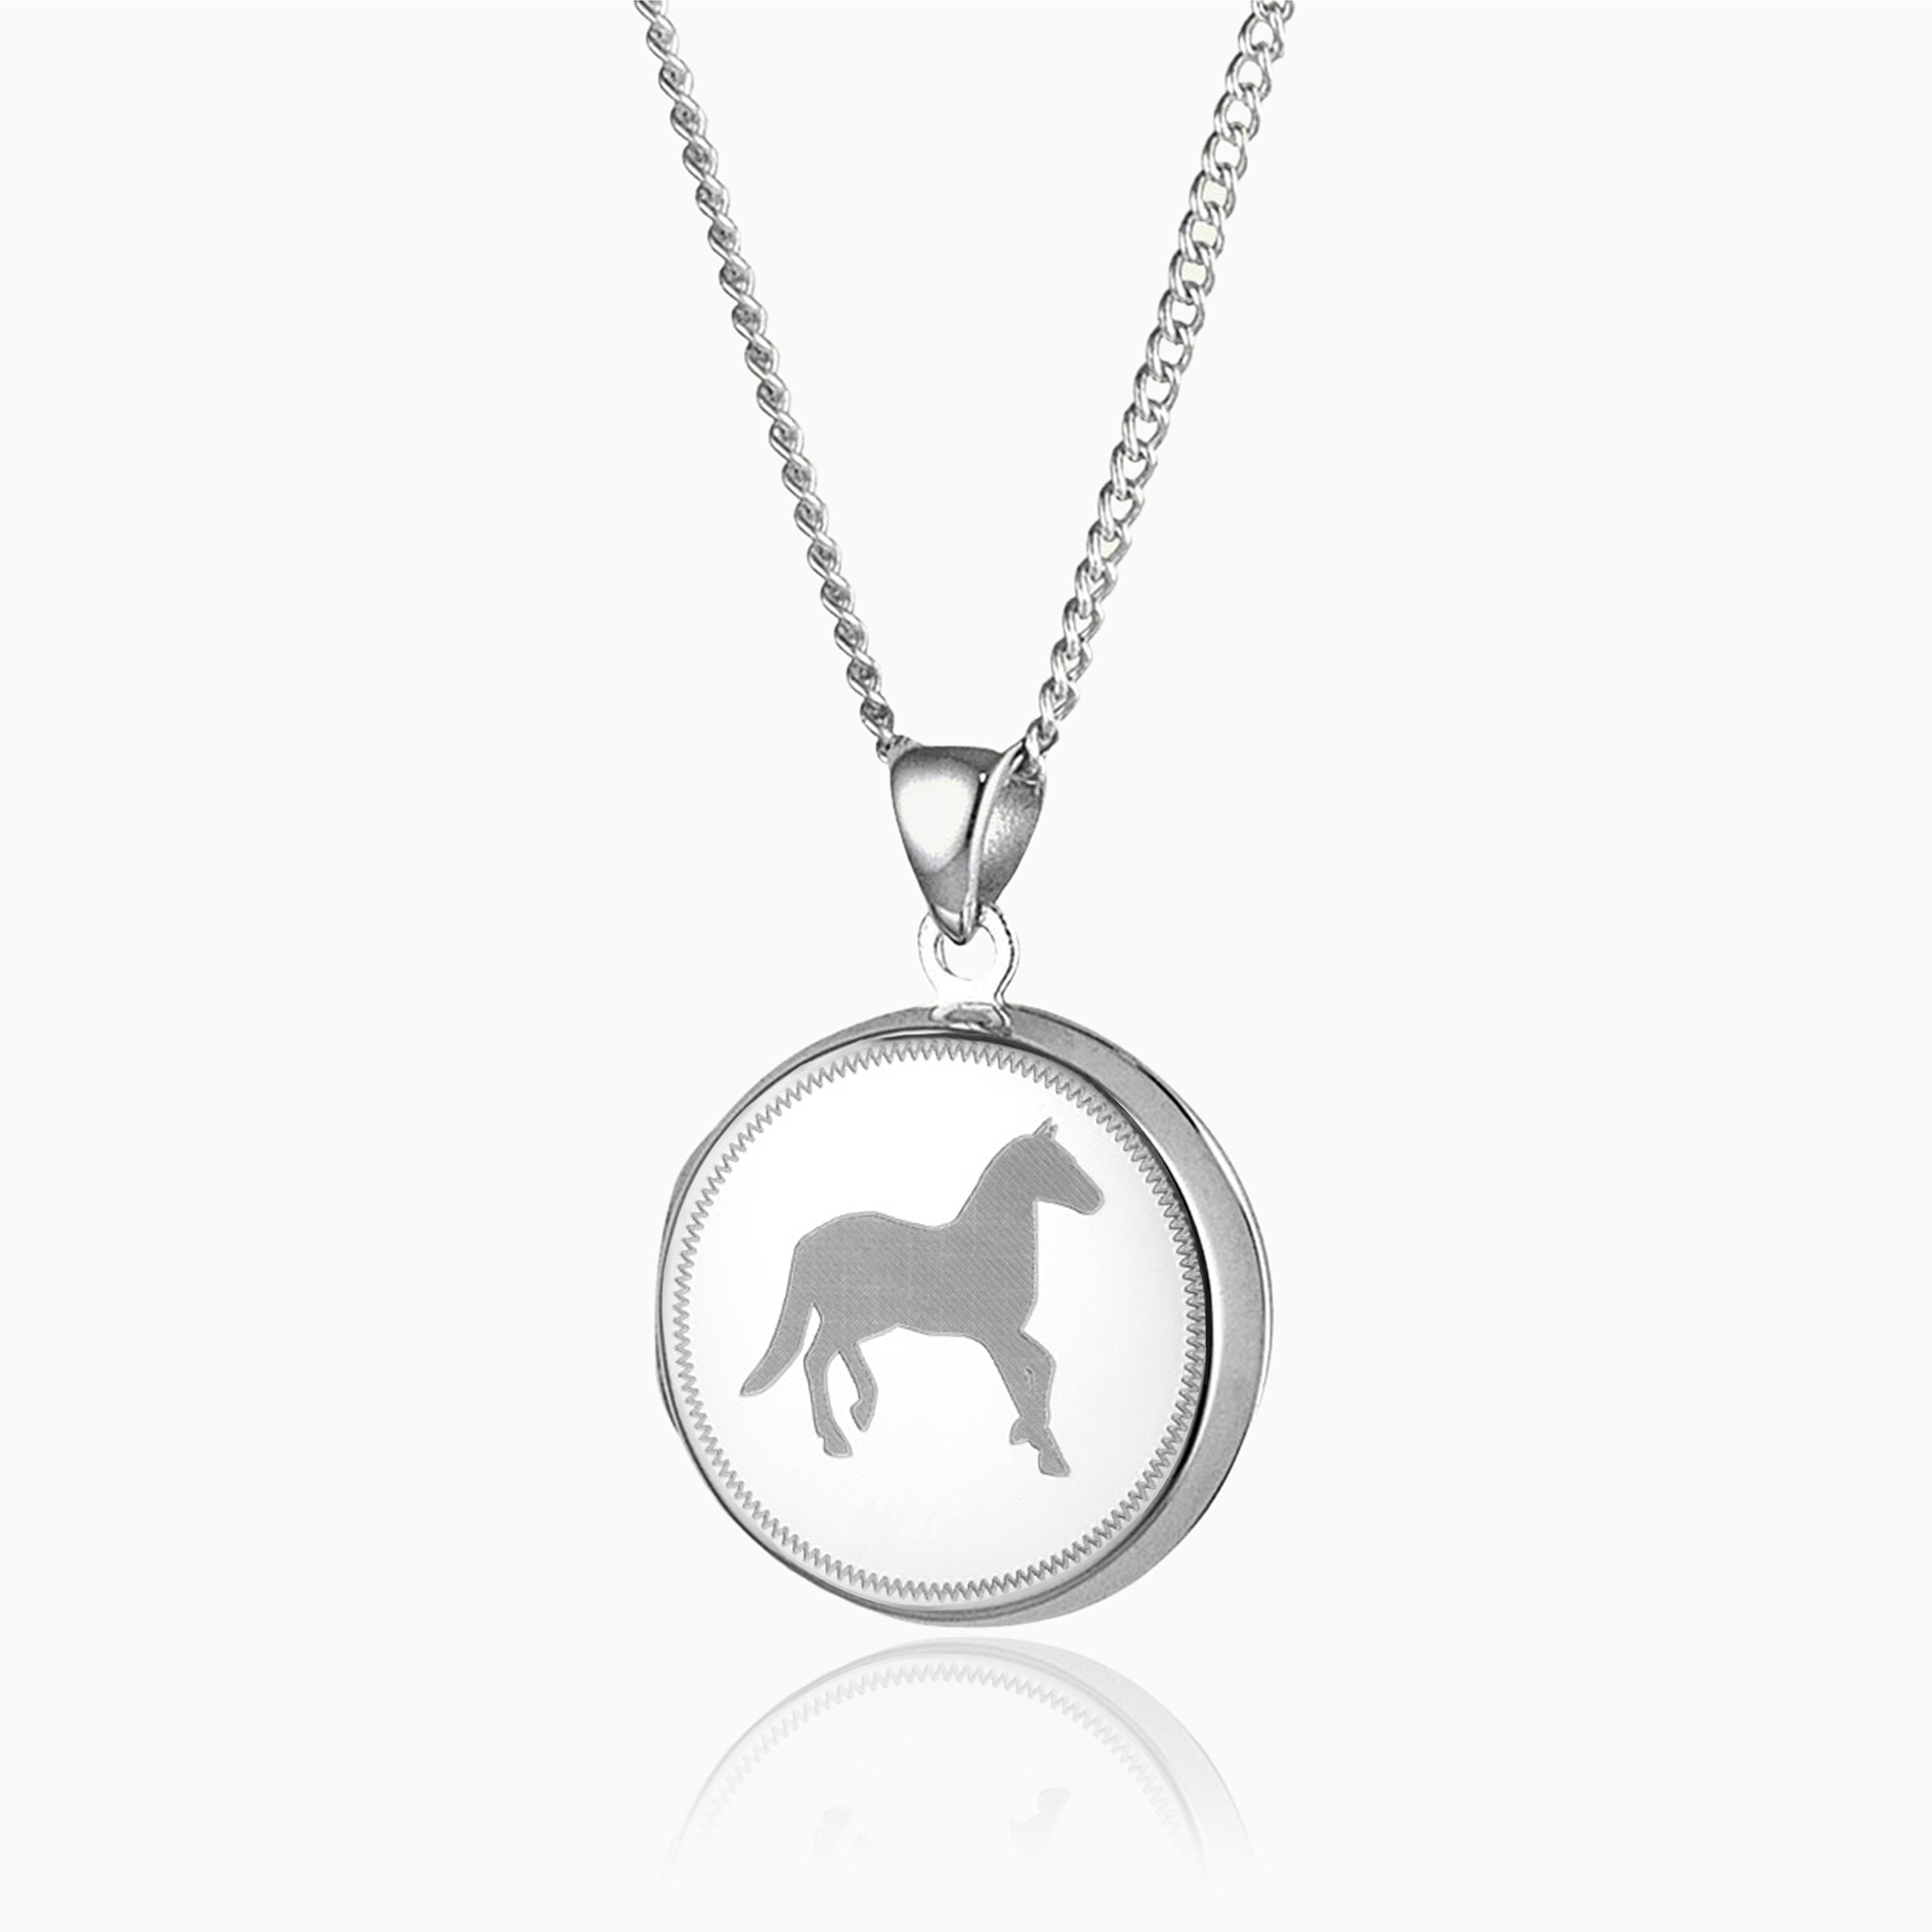 sterling silver round locket with an engraved horse on the front